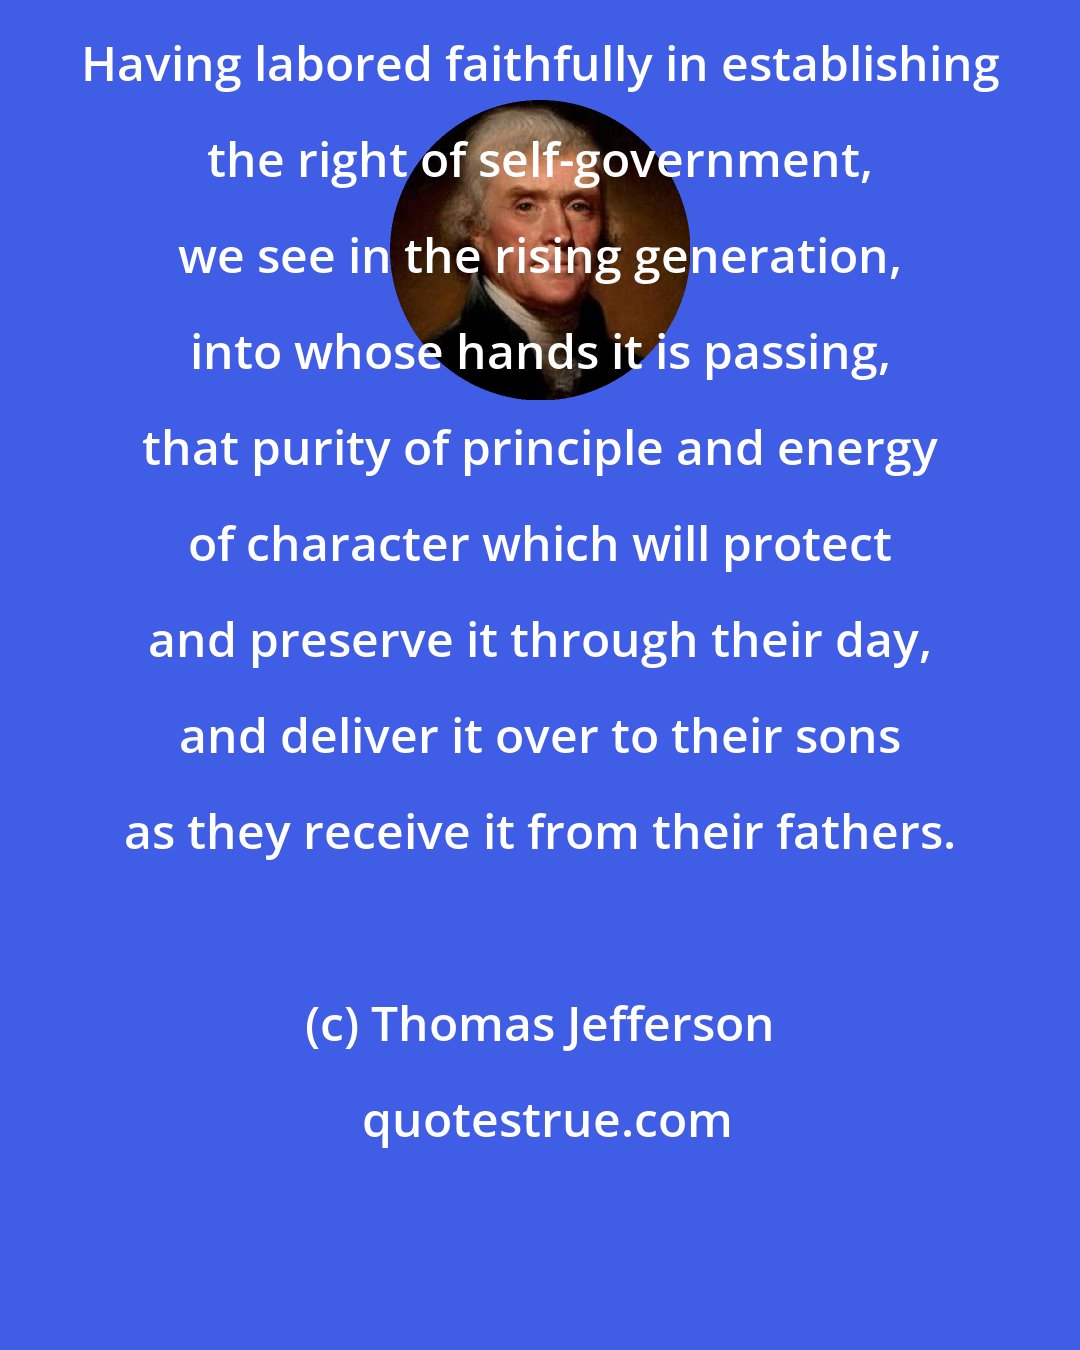 Thomas Jefferson: Having labored faithfully in establishing the right of self-government, we see in the rising generation, into whose hands it is passing, that purity of principle and energy of character which will protect and preserve it through their day, and deliver it over to their sons as they receive it from their fathers.